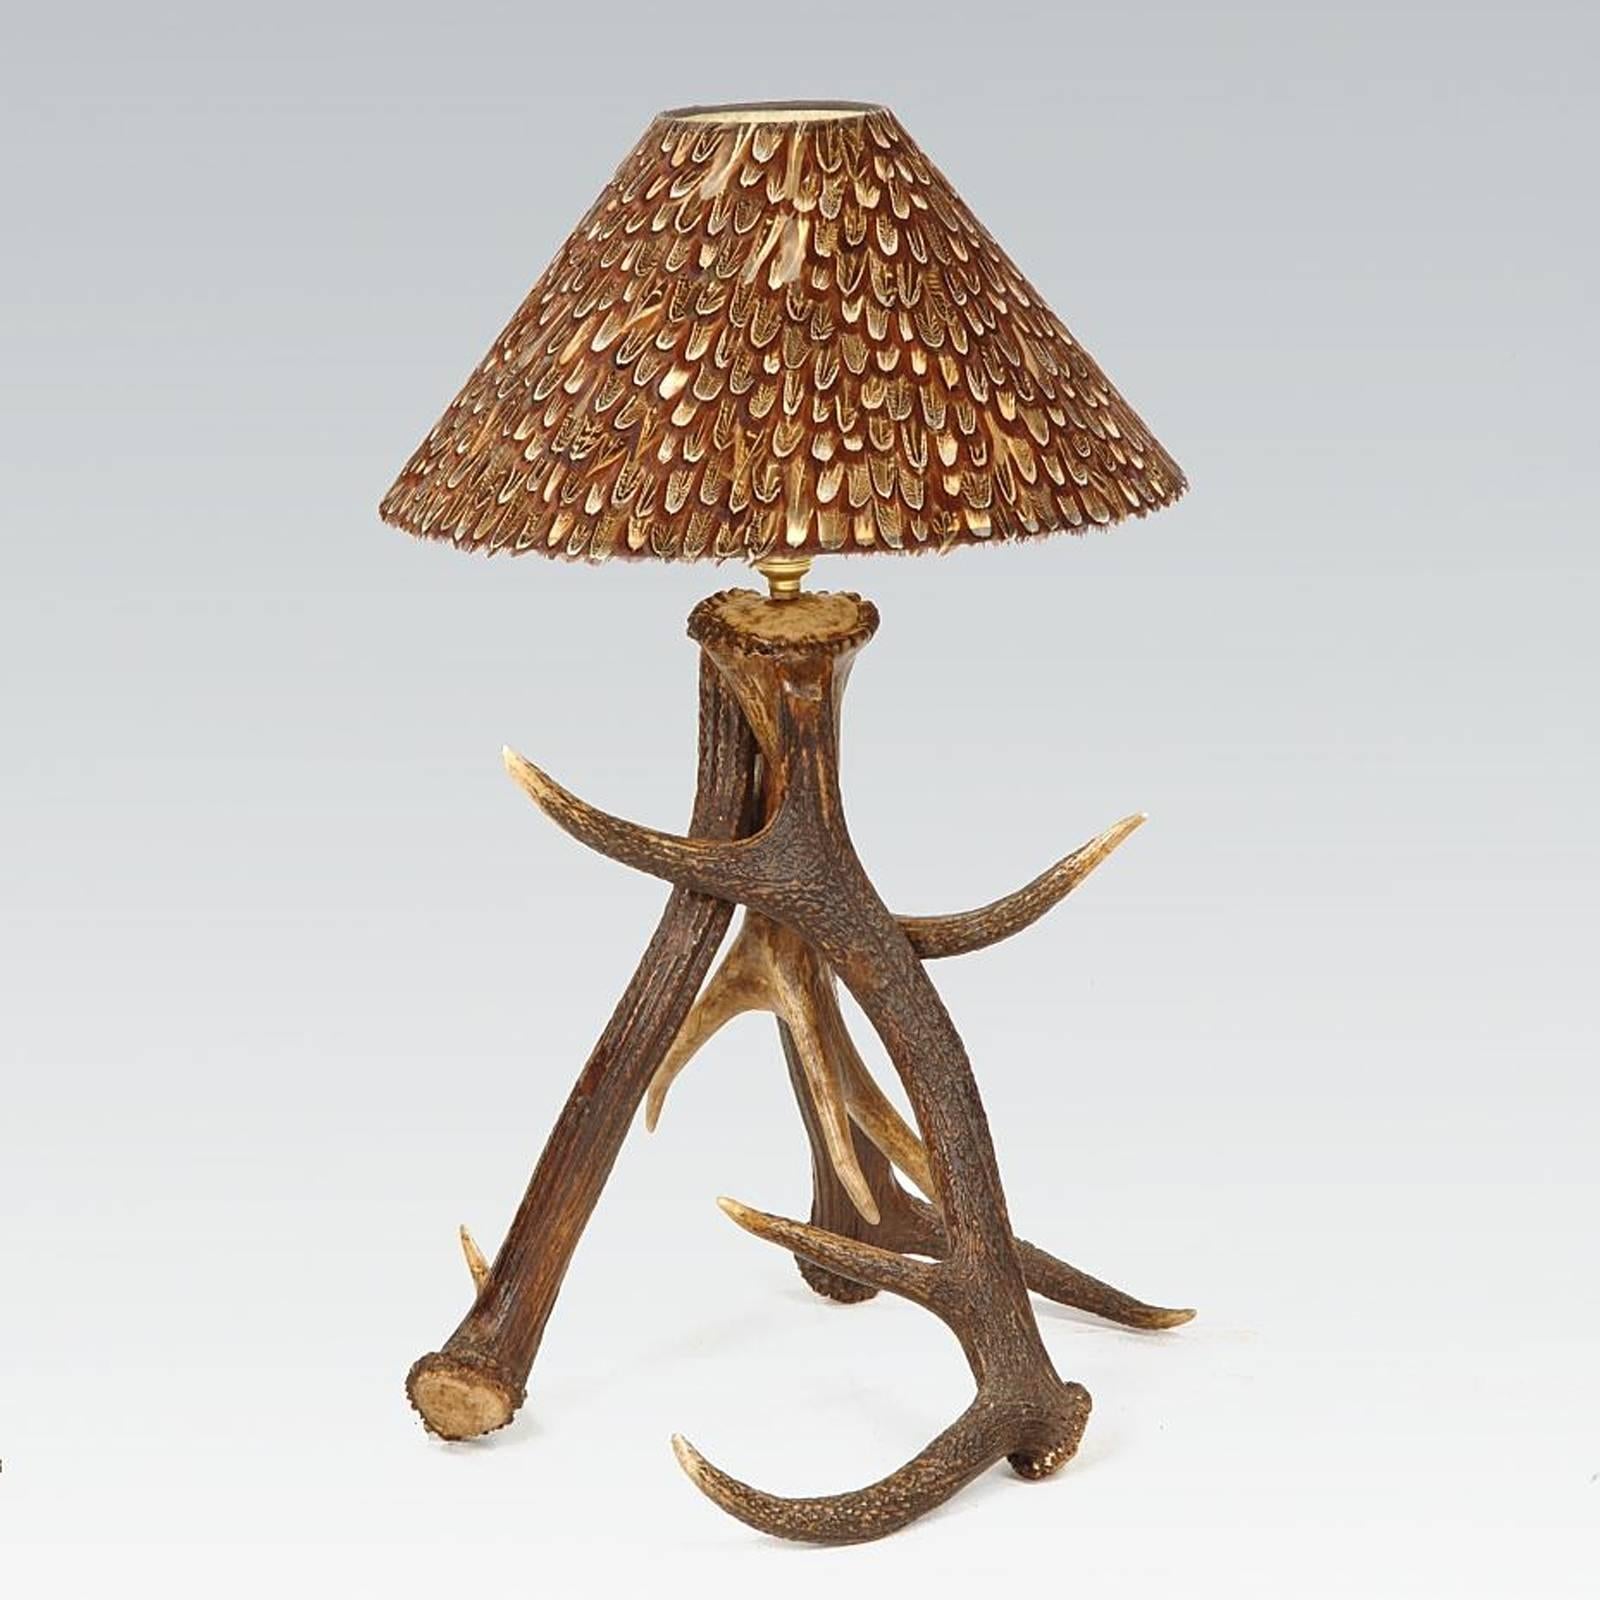 Table lamp three antlers, 1 bulb
with partridge feather lampshade.
Lamp: L 30 x H 55cm, lampshade: Ø35cm.
